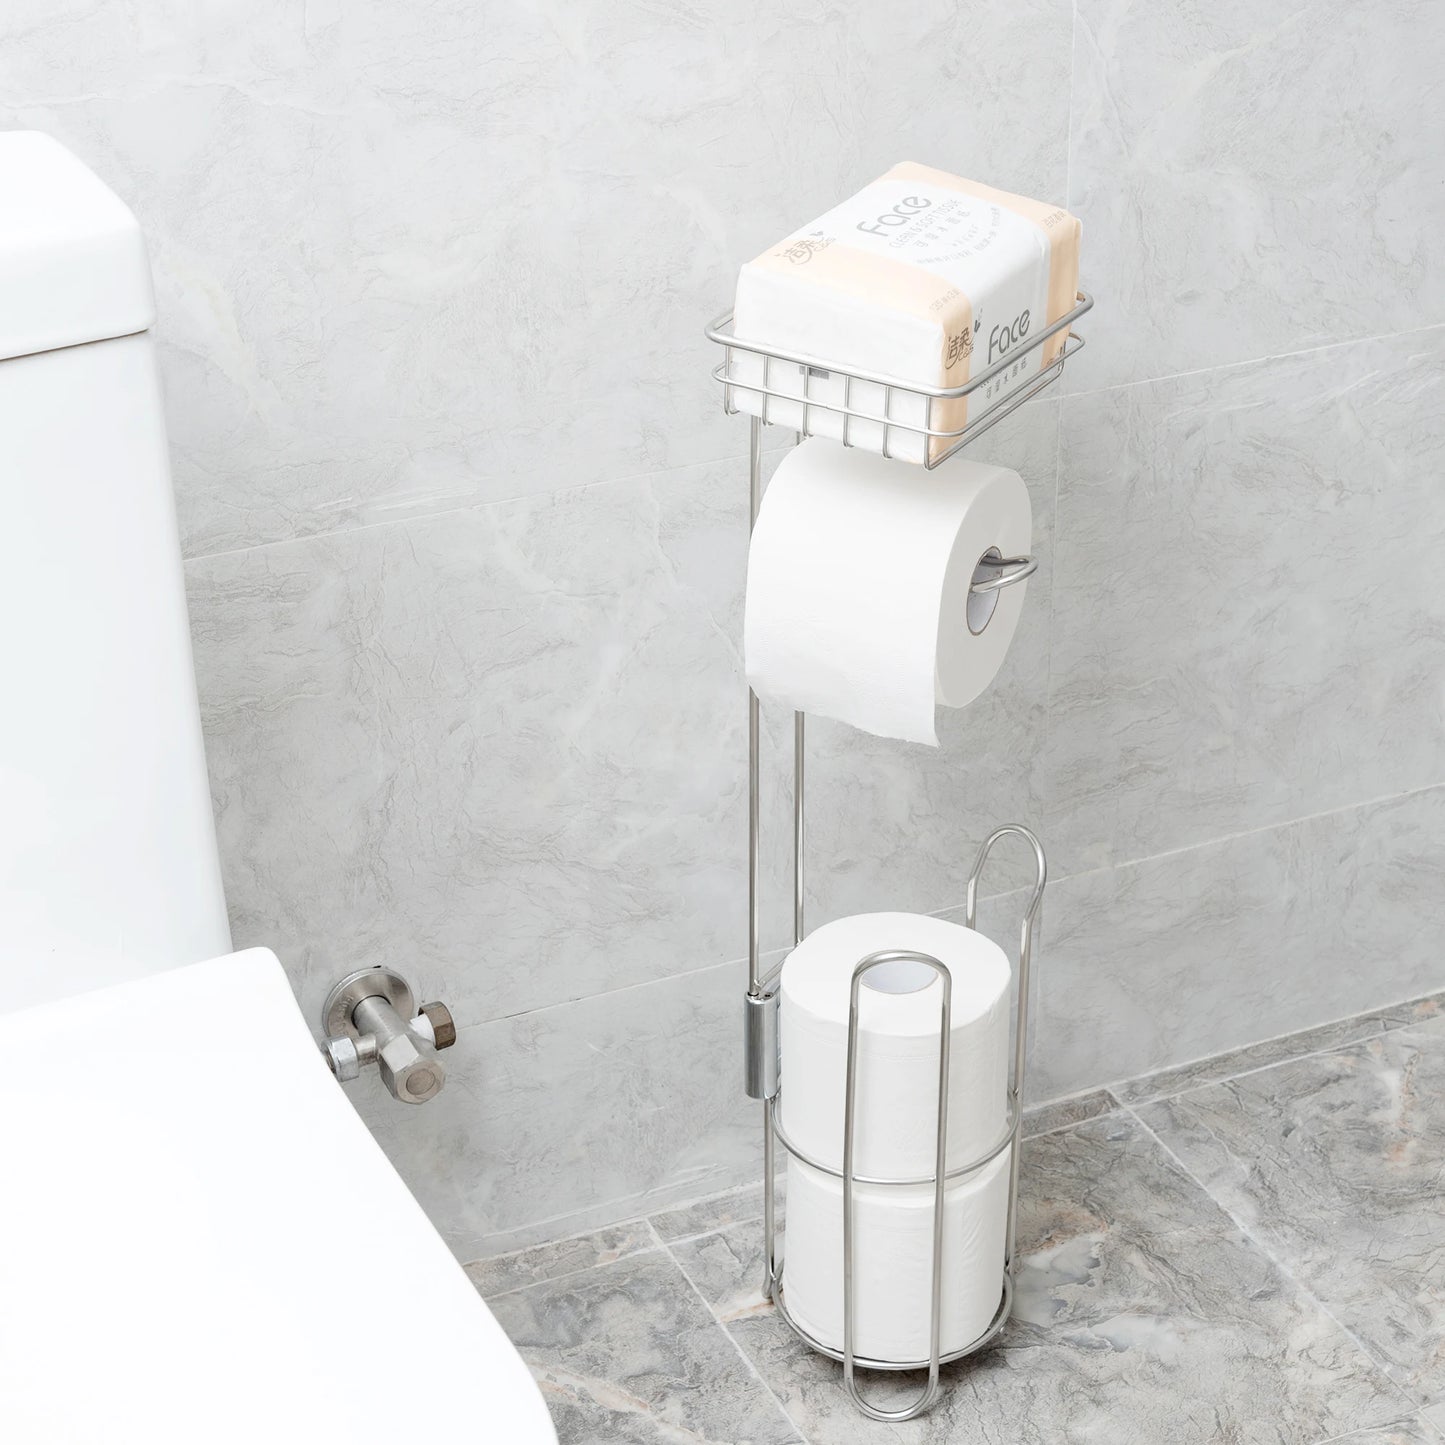 Toilet Paper Holder with Shelf for Cell Phone